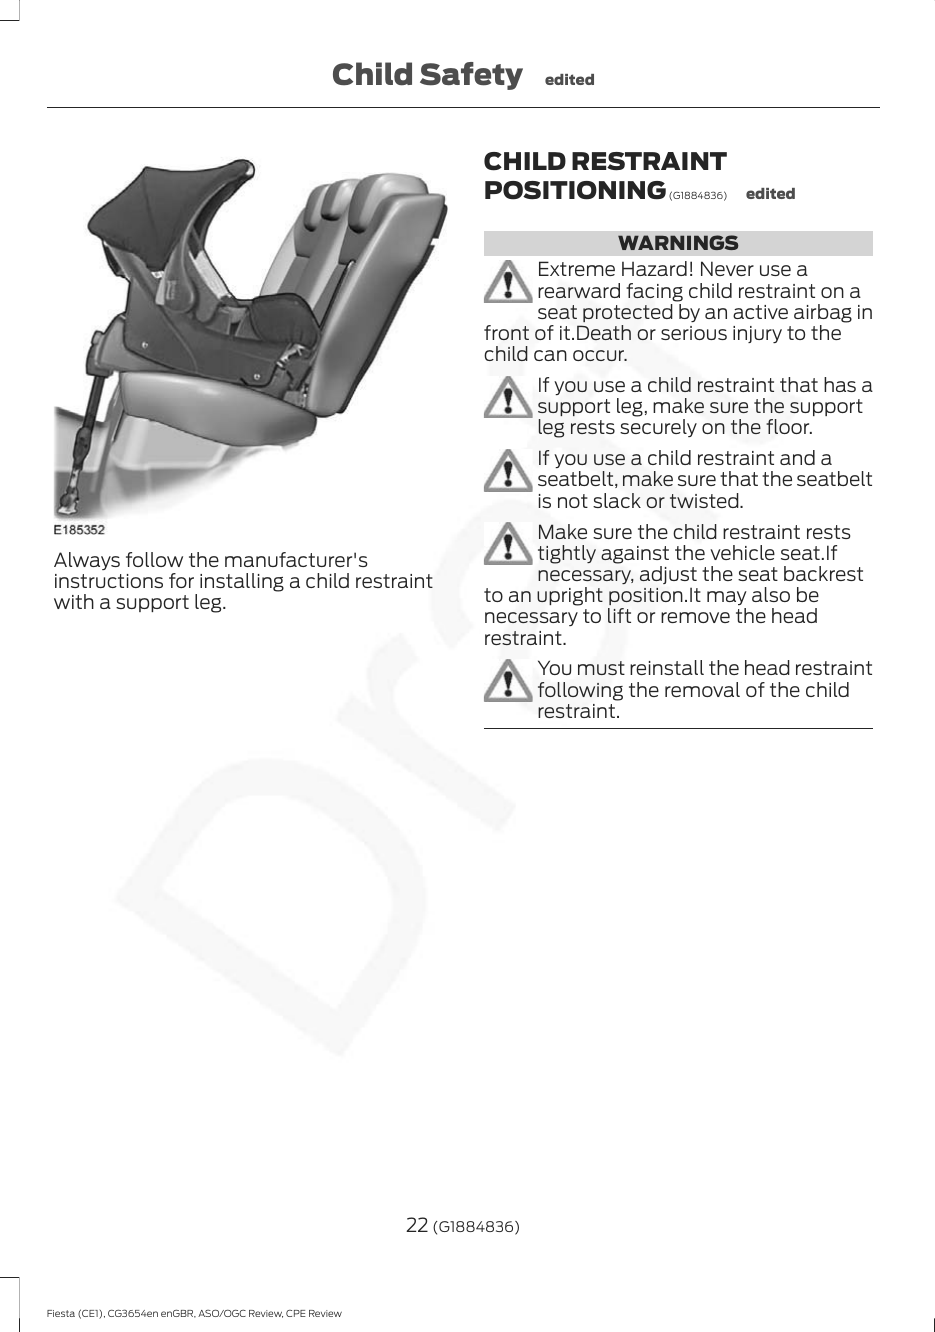 Always follow the manufacturer&apos;sinstructions for installing a child restraintwith a support leg.CHILD RESTRAINTPOSITIONING (G1884836) editedWARNINGSExtreme Hazard! Never use arearward facing child restraint on aseat protected by an active airbag infront of it.Death or serious injury to thechild can occur.If you use a child restraint that has asupport leg, make sure the supportleg rests securely on the floor.If you use a child restraint and aseatbelt, make sure that the seatbeltis not slack or twisted.Make sure the child restraint reststightly against the vehicle seat.Ifnecessary, adjust the seat backrestto an upright position.It may also benecessary to lift or remove the headrestraint.You must reinstall the head restraintfollowing the removal of the childrestraint.22 (G1884836)Fiesta (CE1), CG3654en enGBR, ASO/OGC Review, CPE ReviewChild Safety edited